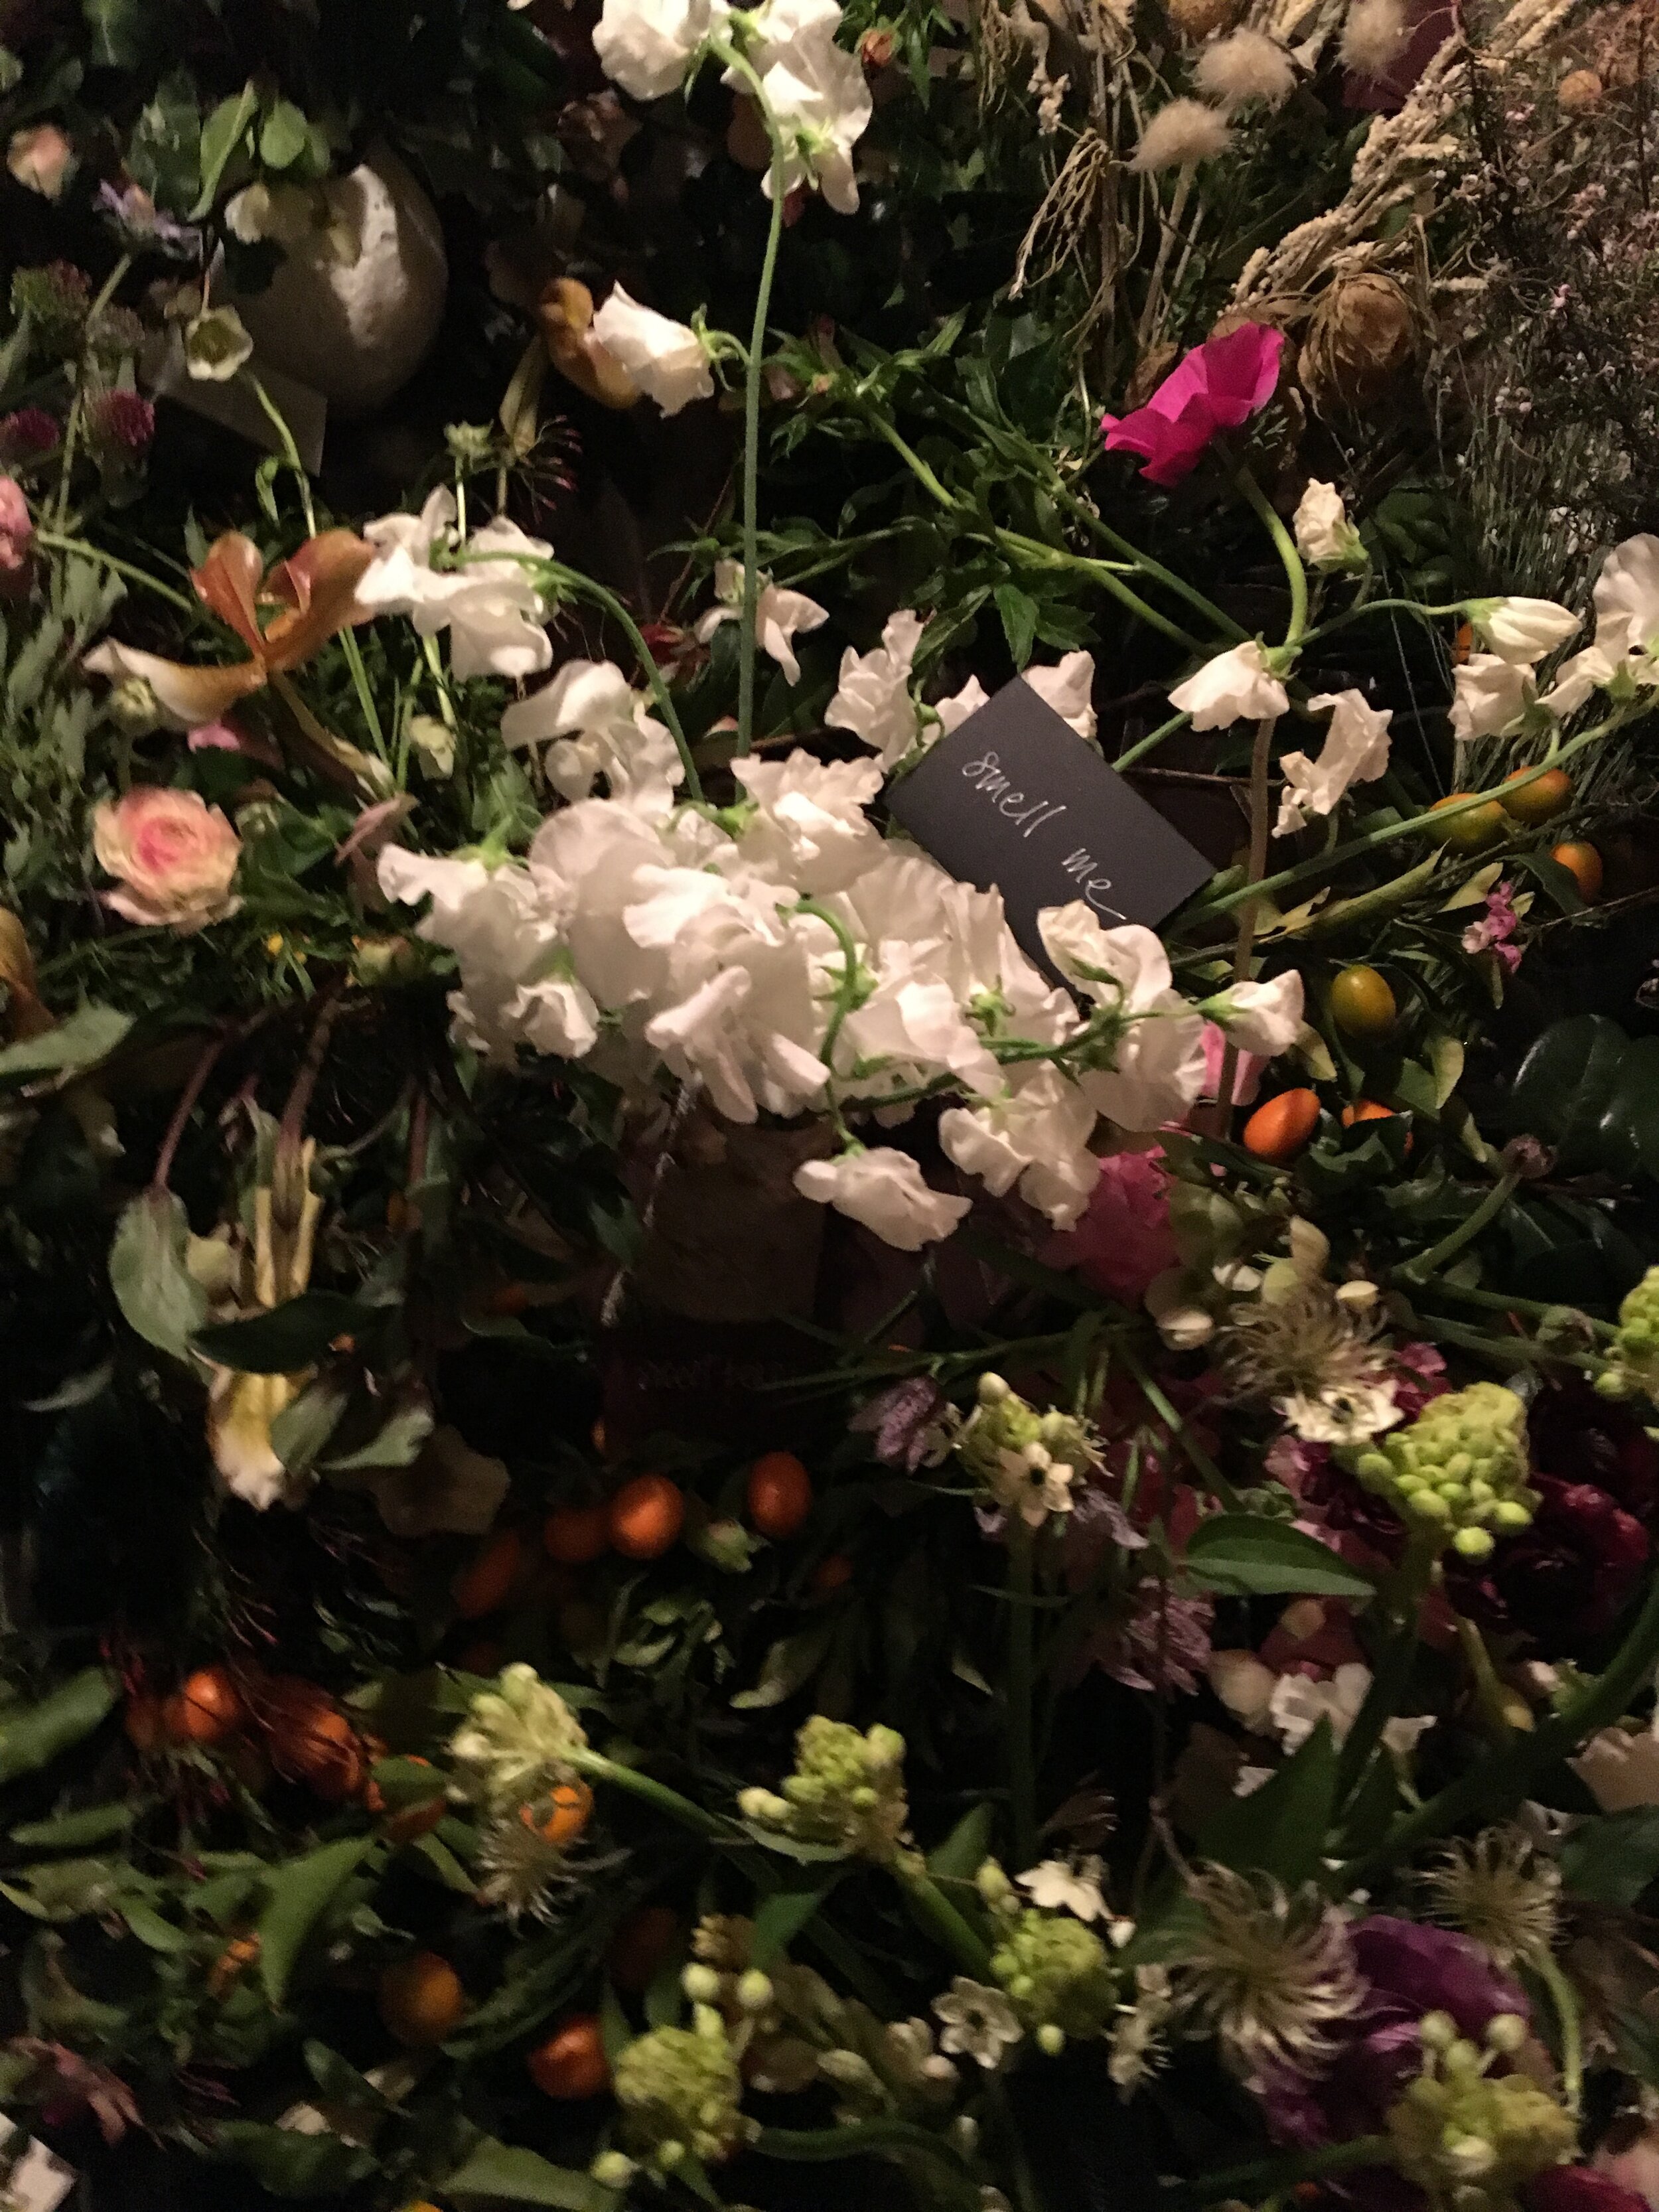  Garden Party installation at Days / 2019   Upstairs in an old brick building, I created a secret garden for all the senses, flowers to smell and touch and eat. The most fragrant tuberose, freesia, sweet peas, hyacinth. Weird enormous seed pods, ghos